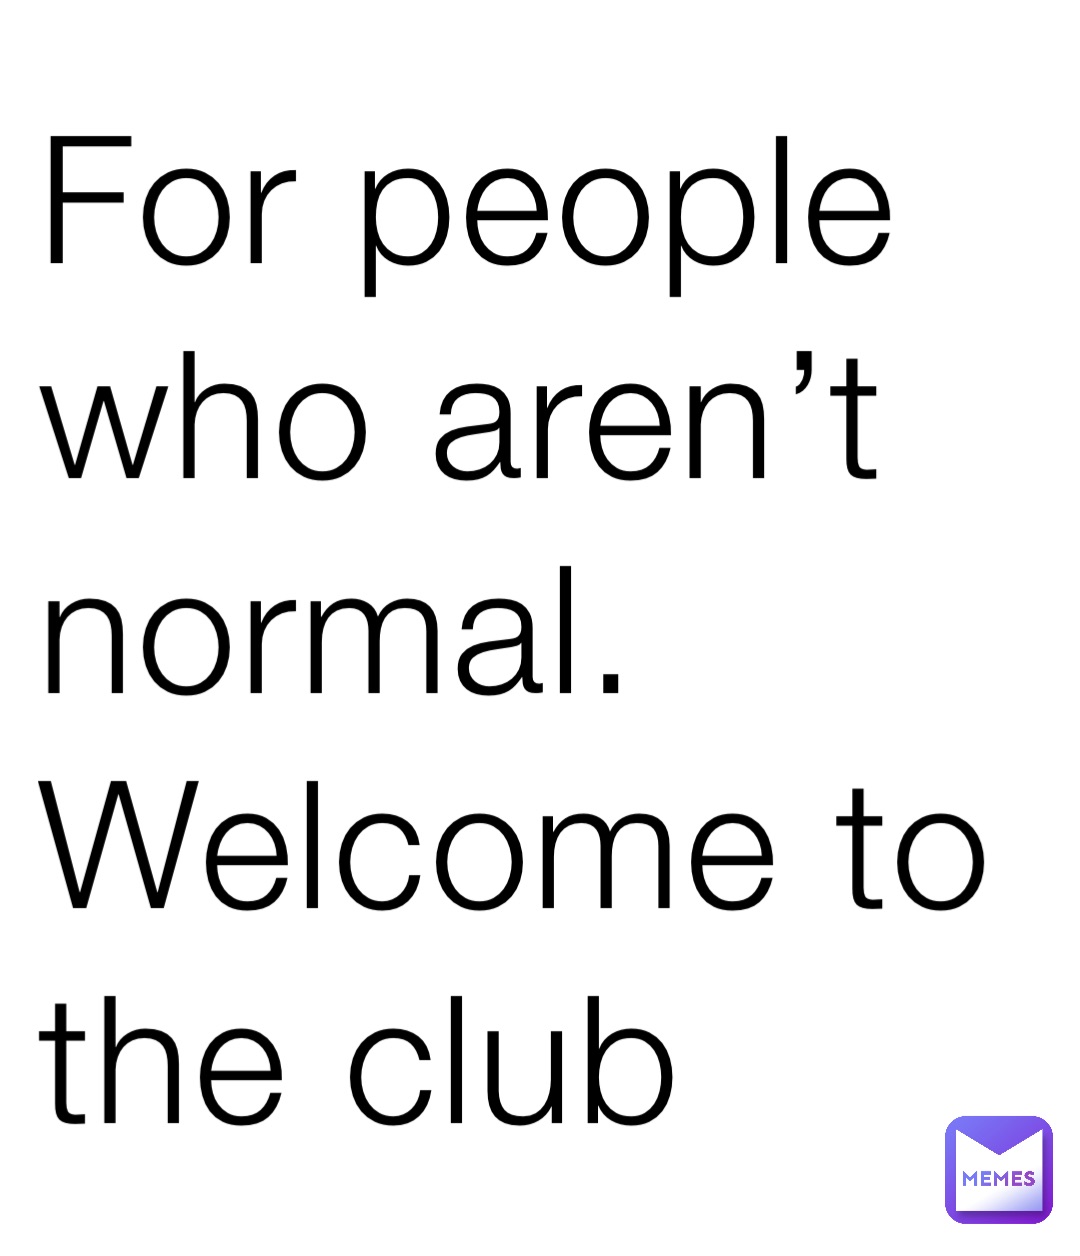 For people who aren’t normal. Welcome to the club